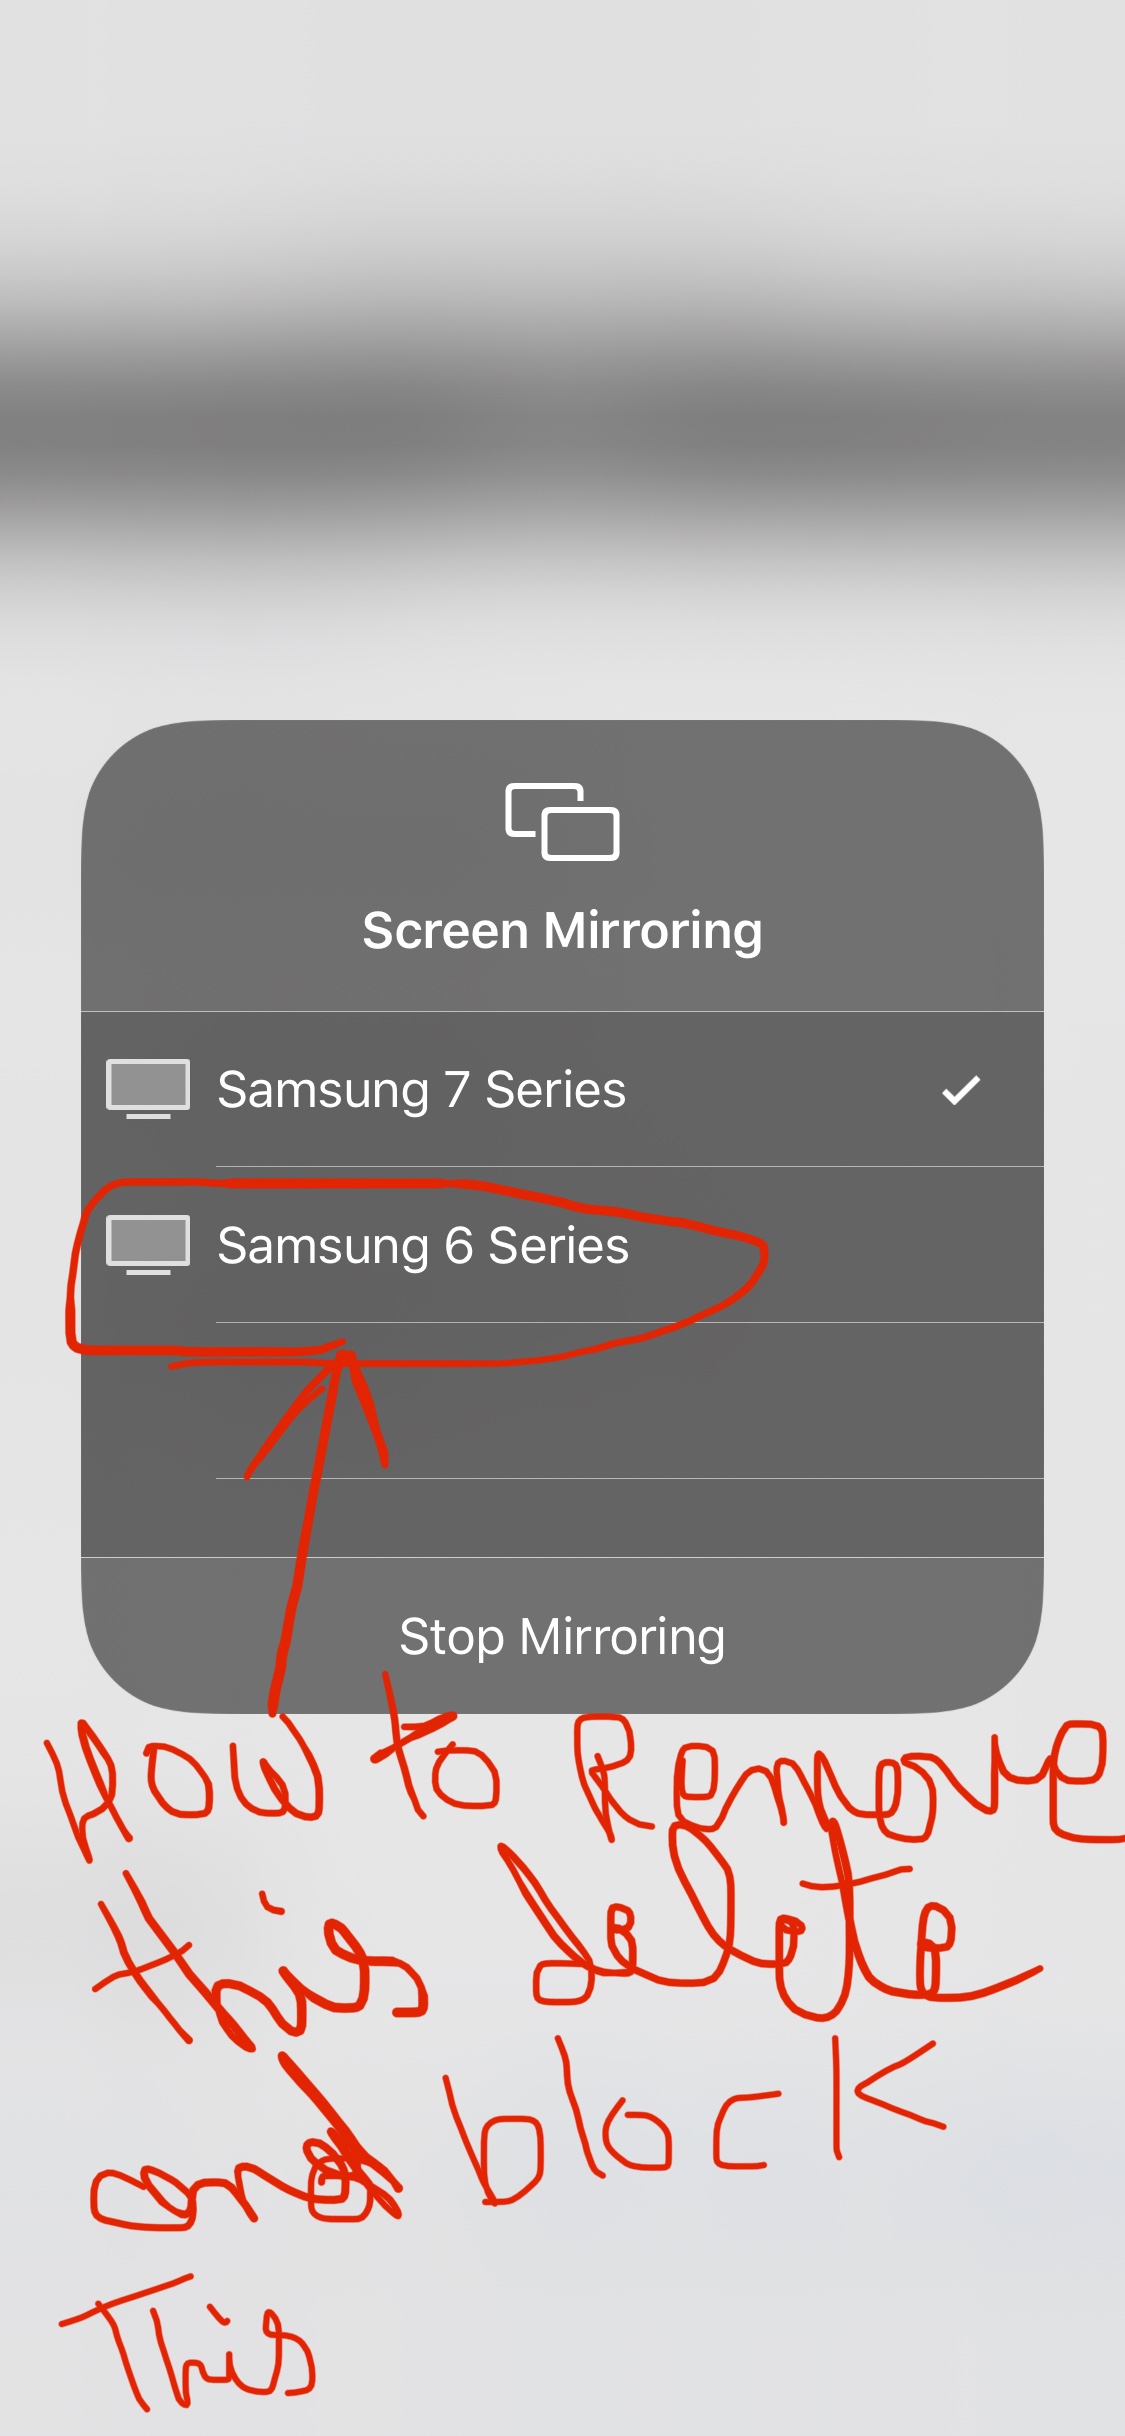 How To Remove Samsung Tv From Iphone, How To Get My Iphone Mirror On Samsung Tv